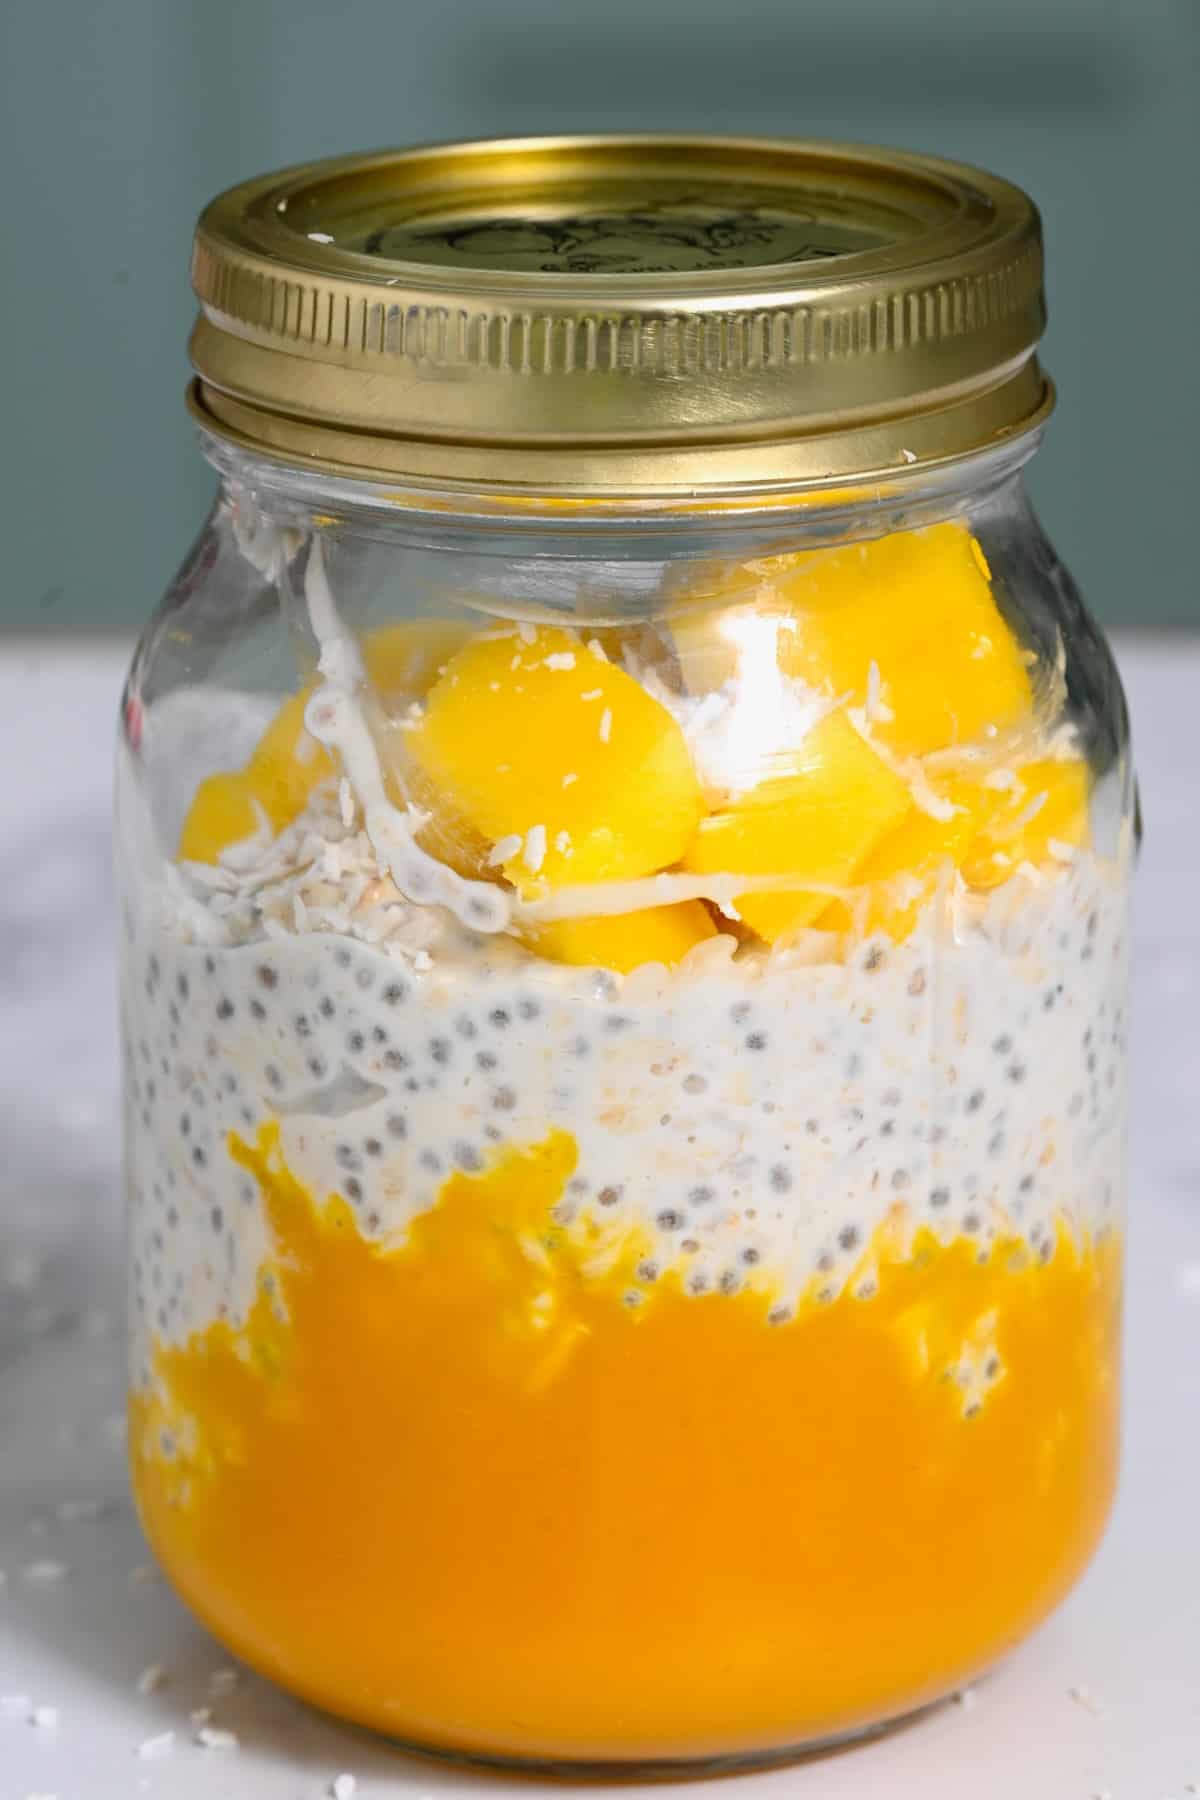 https://www.alphafoodie.com/wp-content/uploads/2022/06/How-to-Make-Overnight-Oats-A-jar-with-mango-coconut-overnight-oats.jpeg